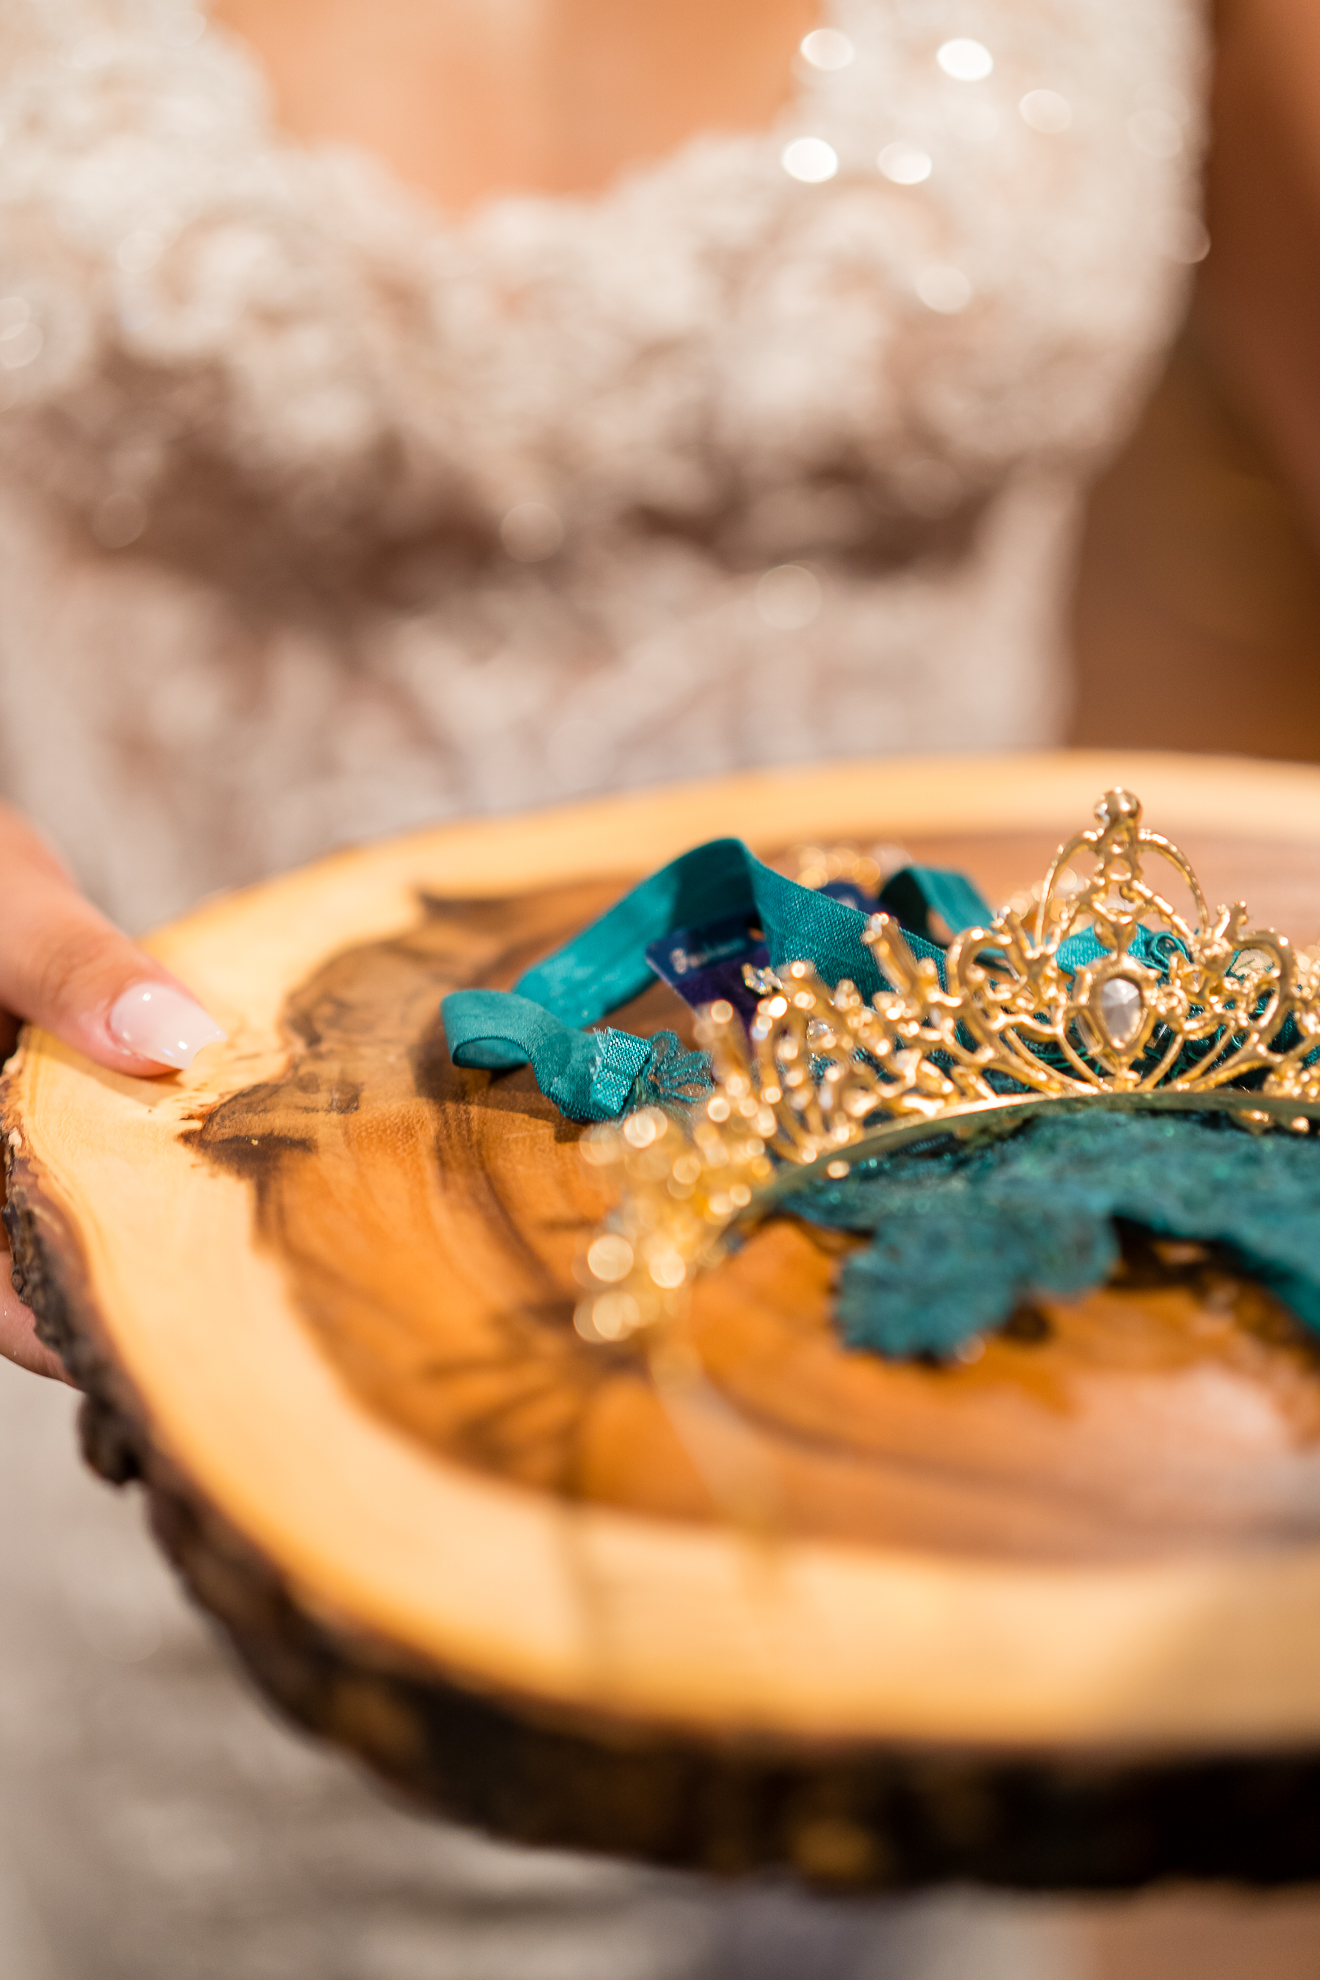 ThomasKim_photography A bride holding a tiara on a wooden plate for her wedding celebration.